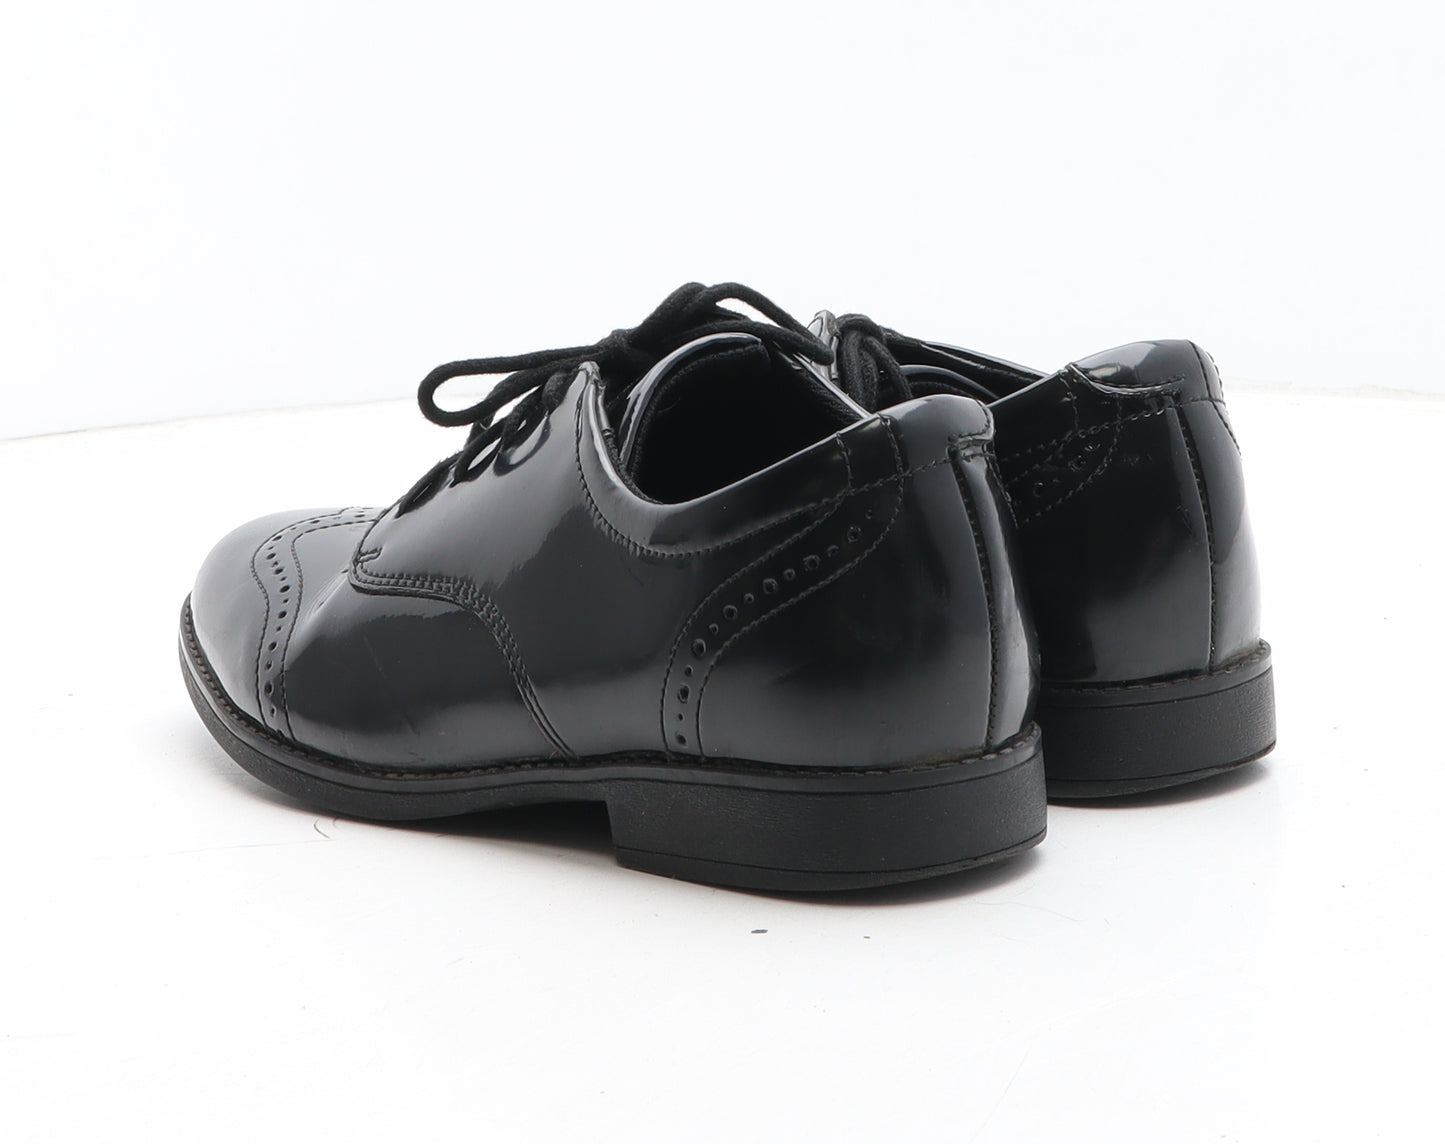 Clarks Womens Black Synthetic Oxford Casual UK